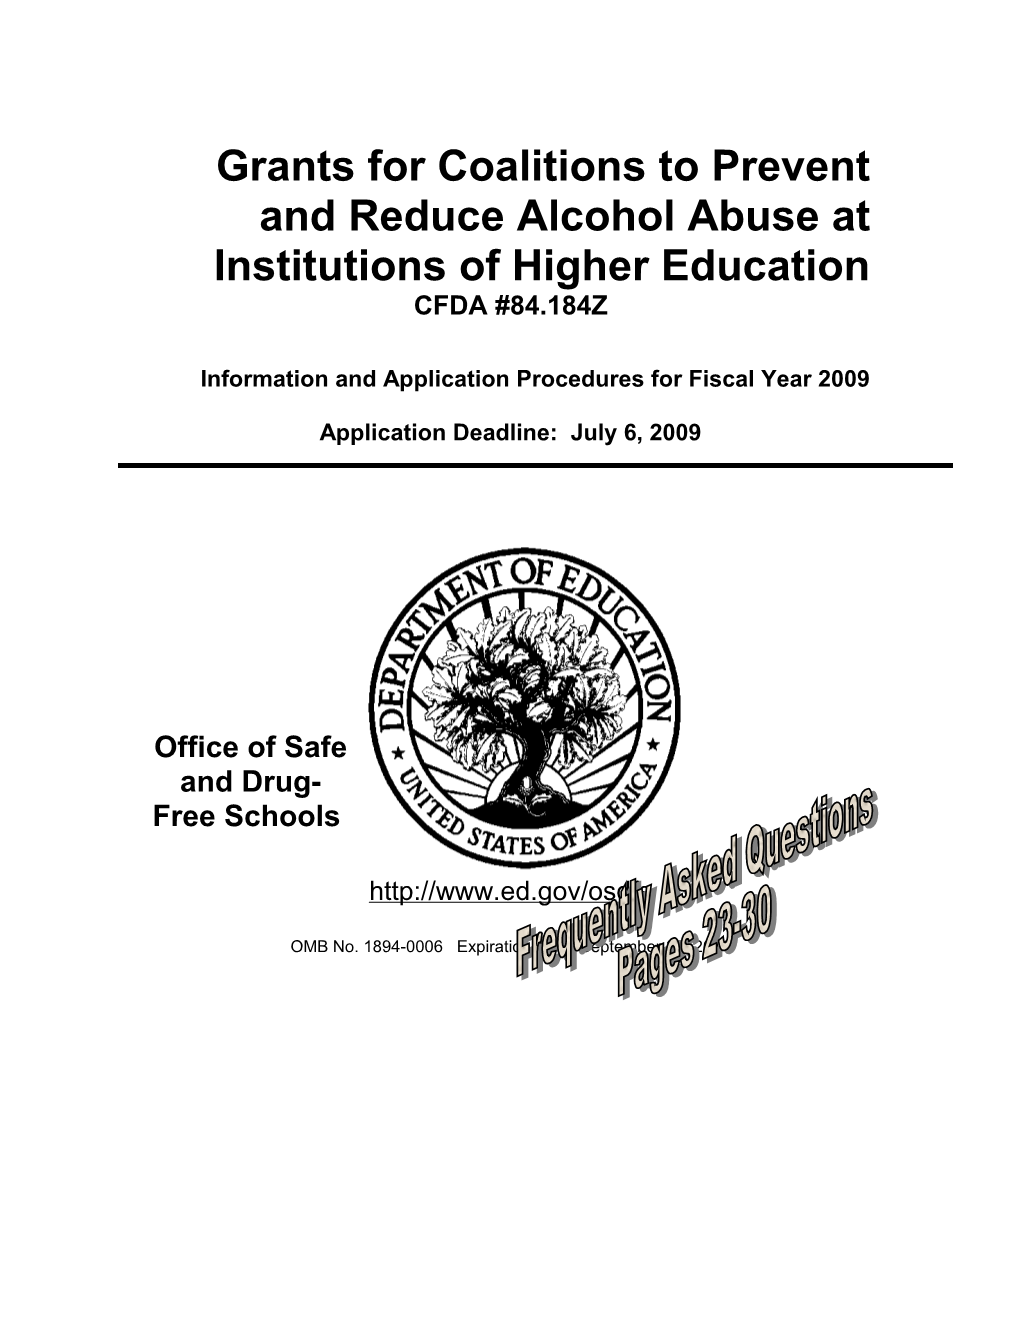 Grants for Coalitions to Prevent and Reduce Alcohol Abuse at Institutions of Higher Education